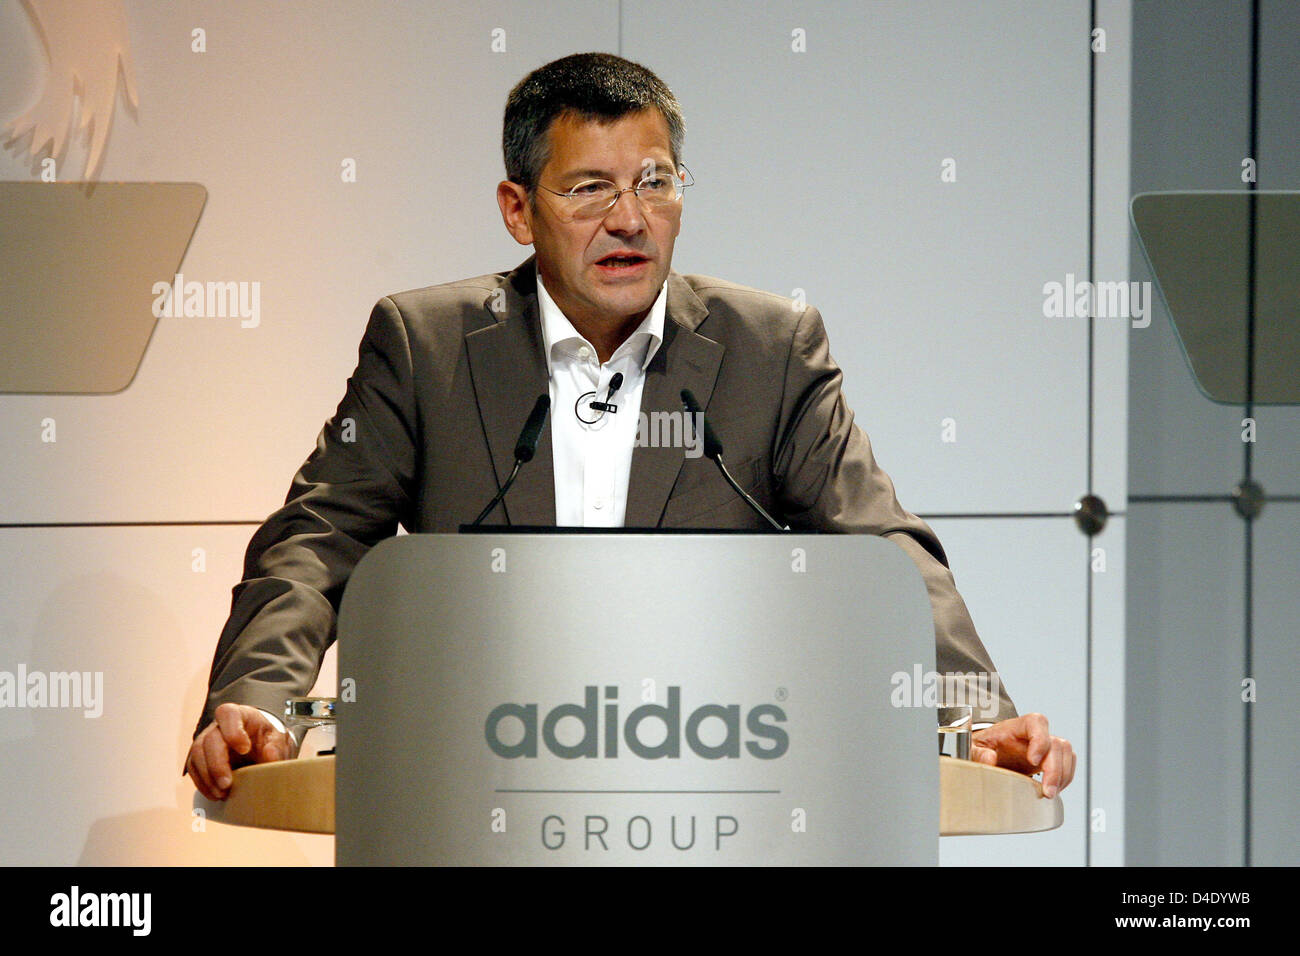 Adidas-CEO Herbert Hainer delivers a speech at the company's general  meeting in Fuerth, Germany, 08 May 2008. Hainer affirmed his goal to make  the German brand the world's leading sports goods manufacturer.